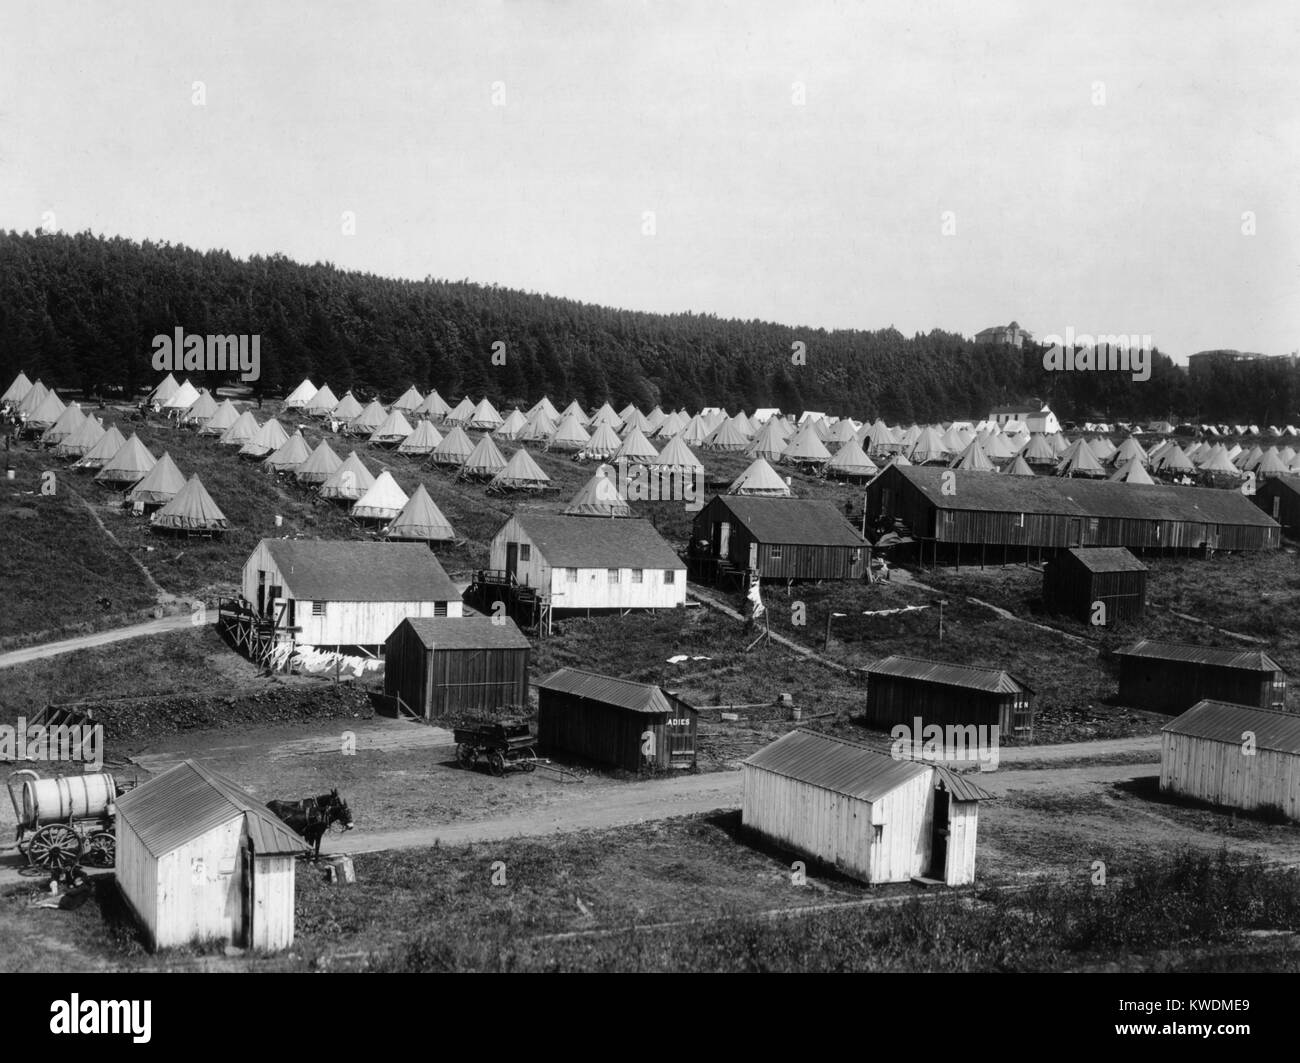 Refugee camp within the Presidio of San Francisco after the April 18, 1906 Earthquake and fire. 16,000 refugees were sheltered and fed at the Presidio. The 3,000 tents were arranged in orderly street-grid formation complete with numbers and directories (BSLOC 2017 17 37) Stock Photo